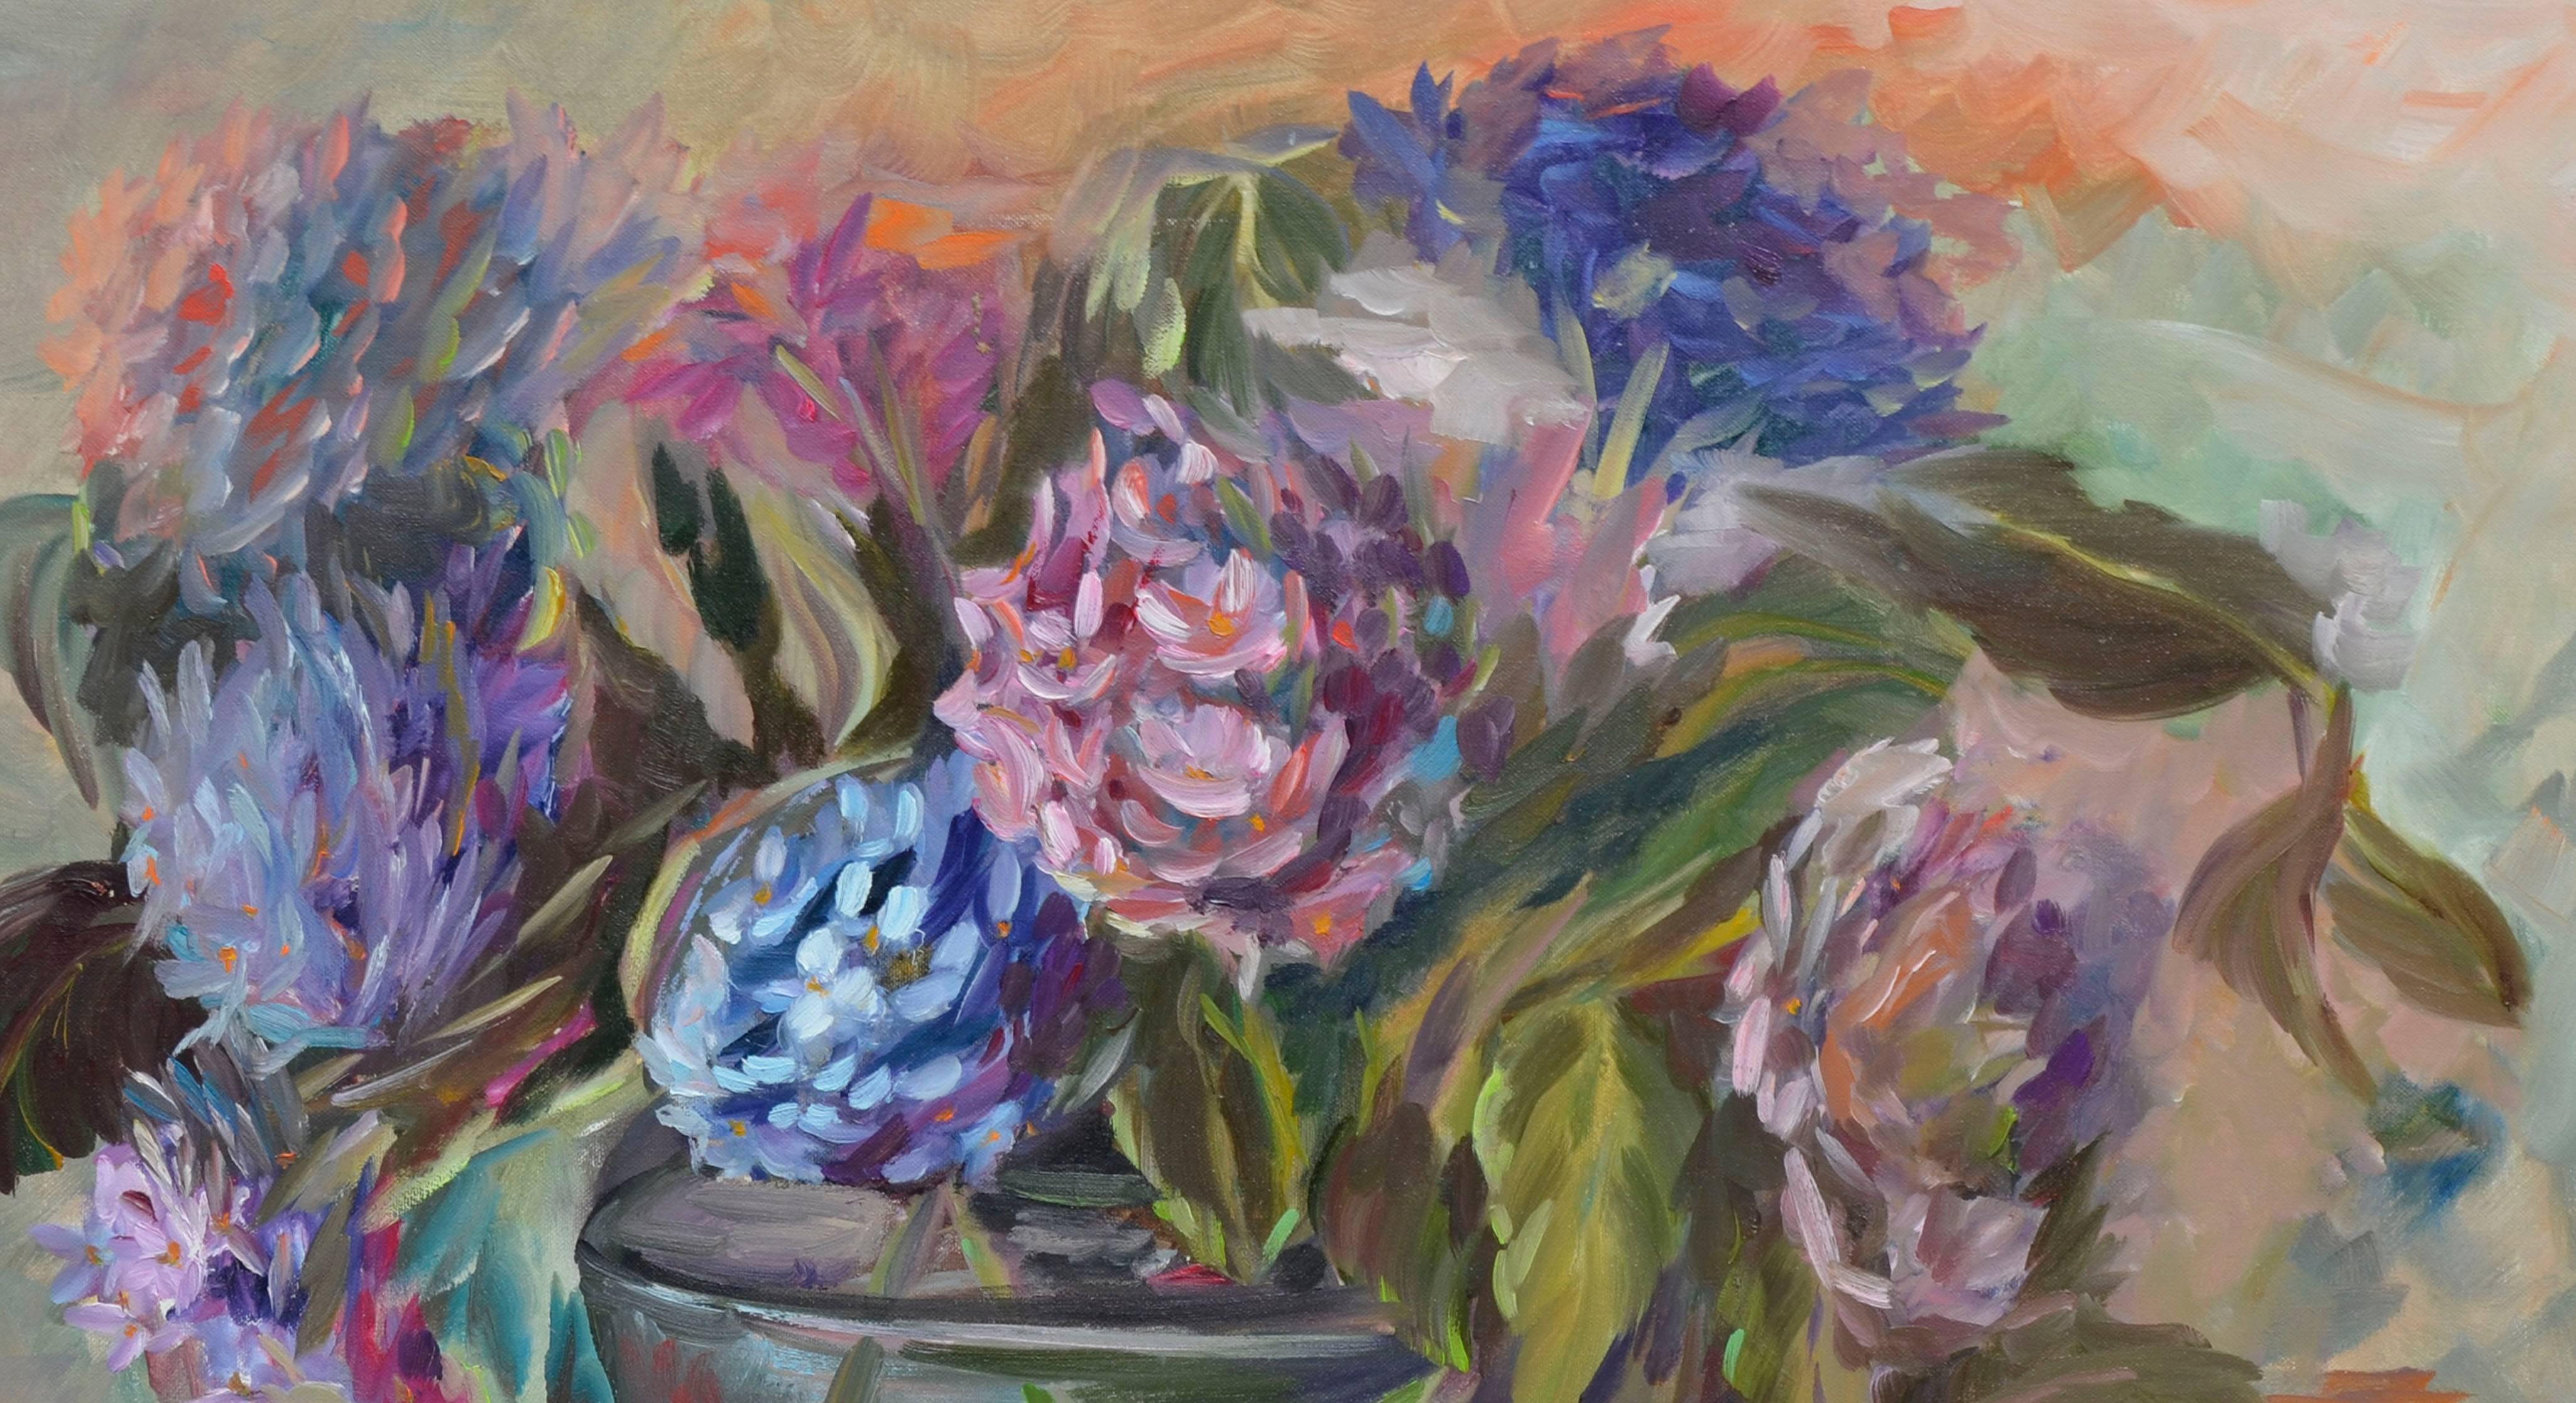 Hydrangeas, Colorful Floral Still Life  - Painting by Dorsey American